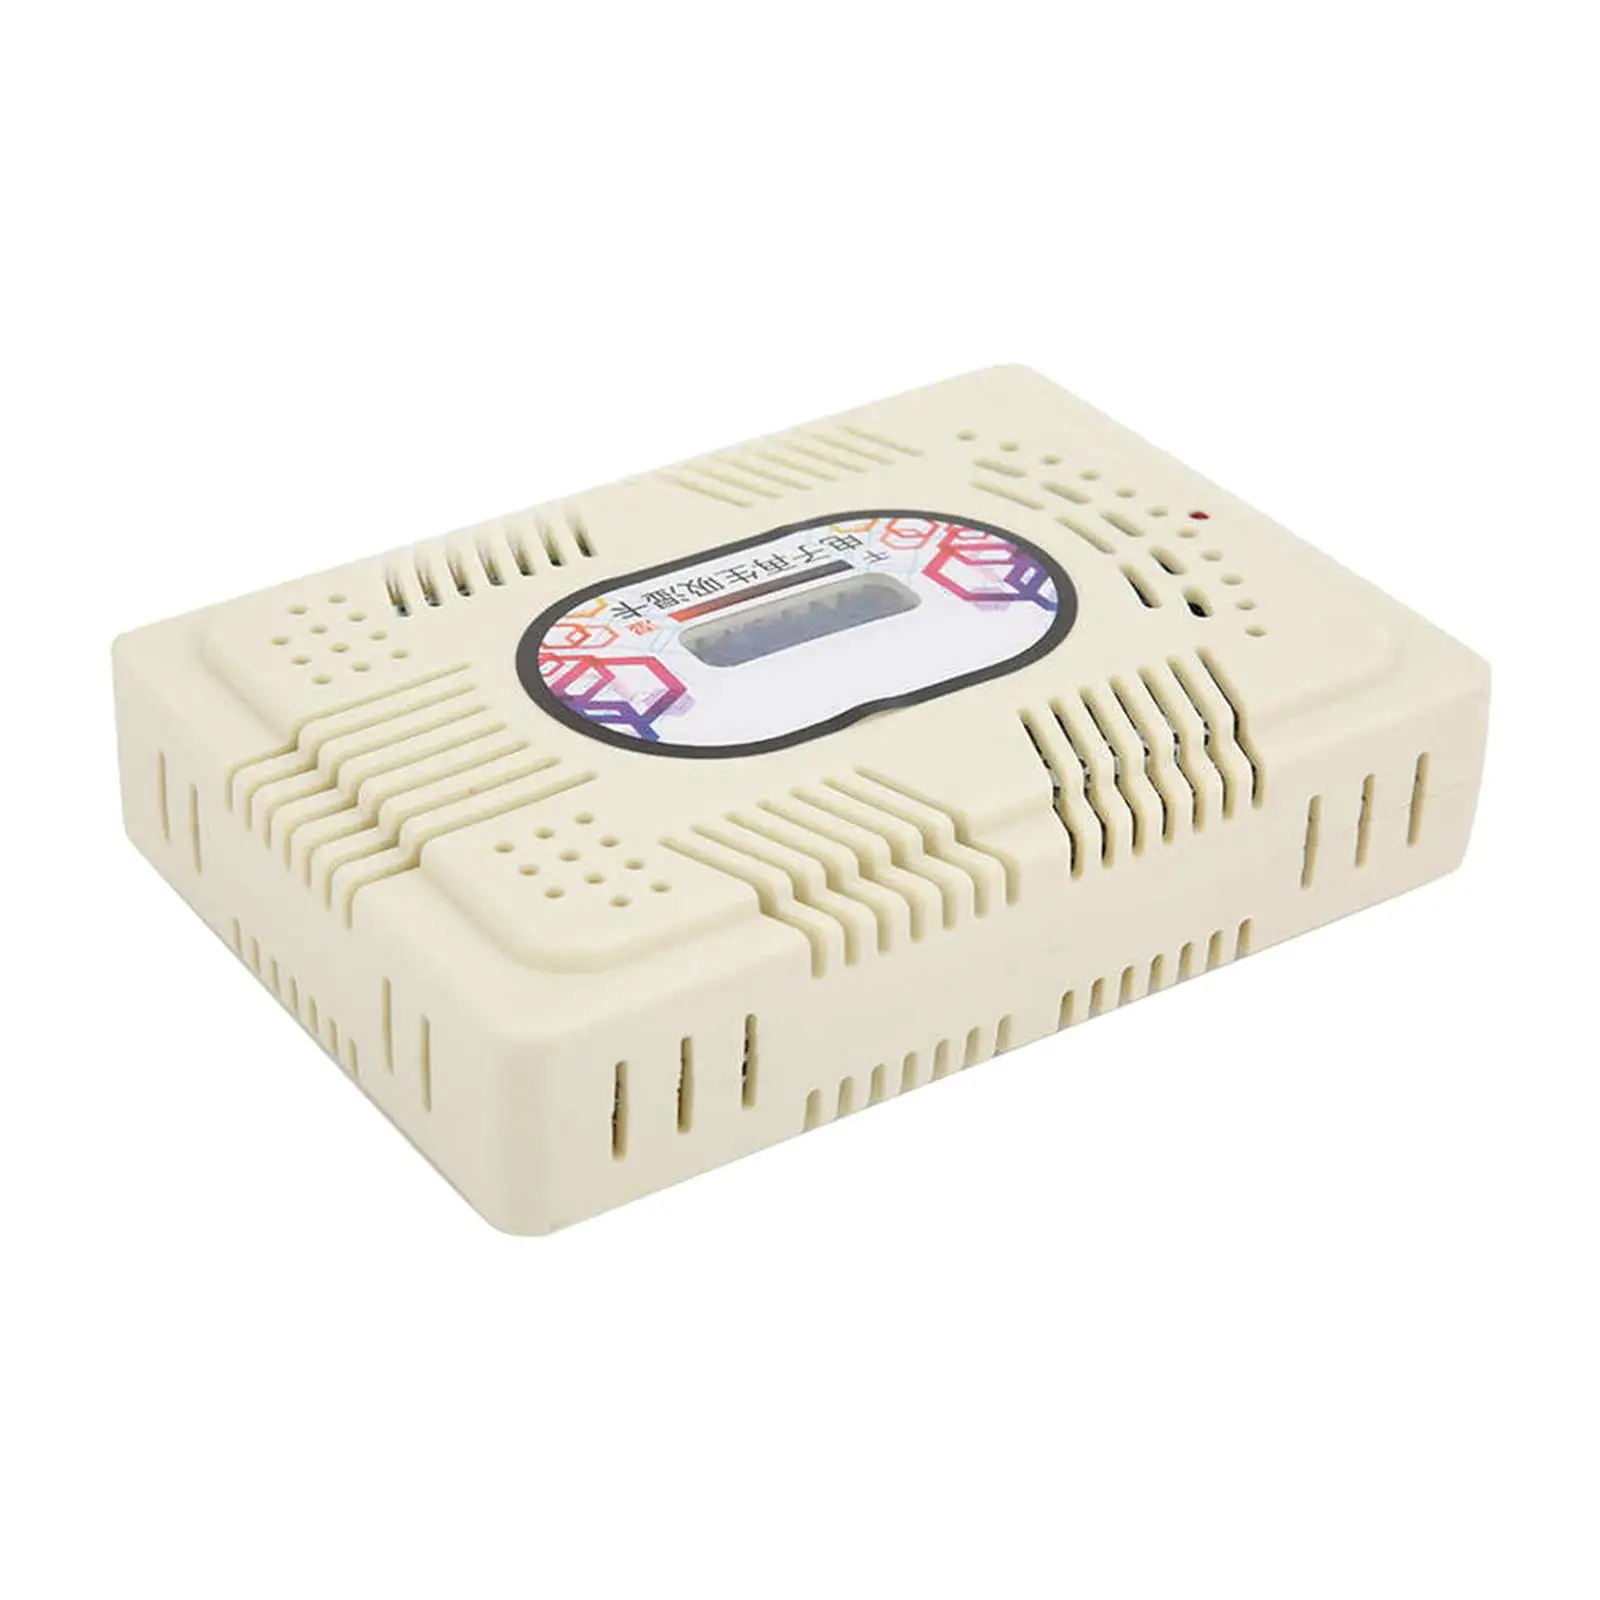 Electronic Hygroscopic Card Accessories Professional Saving Space Durable Widely Applicable High Performance Dehumidifier US